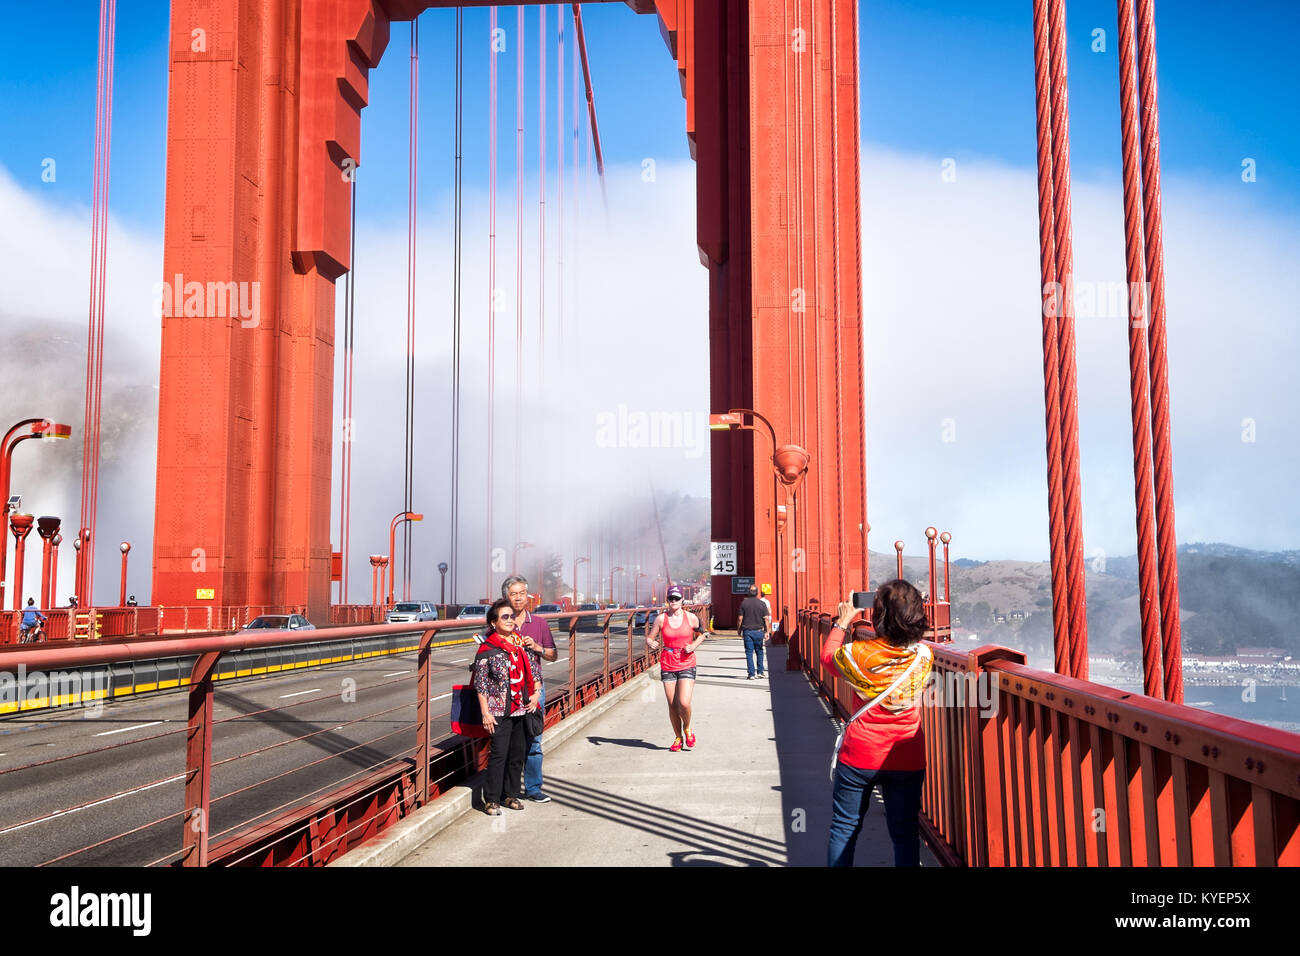 SAN FRANCISCO, CA- Oct. 11, 2015: On the Golden Gate Bridge on a sunny day with fog in the background. People in the pedestrian lanes are shown taking Stock Photo